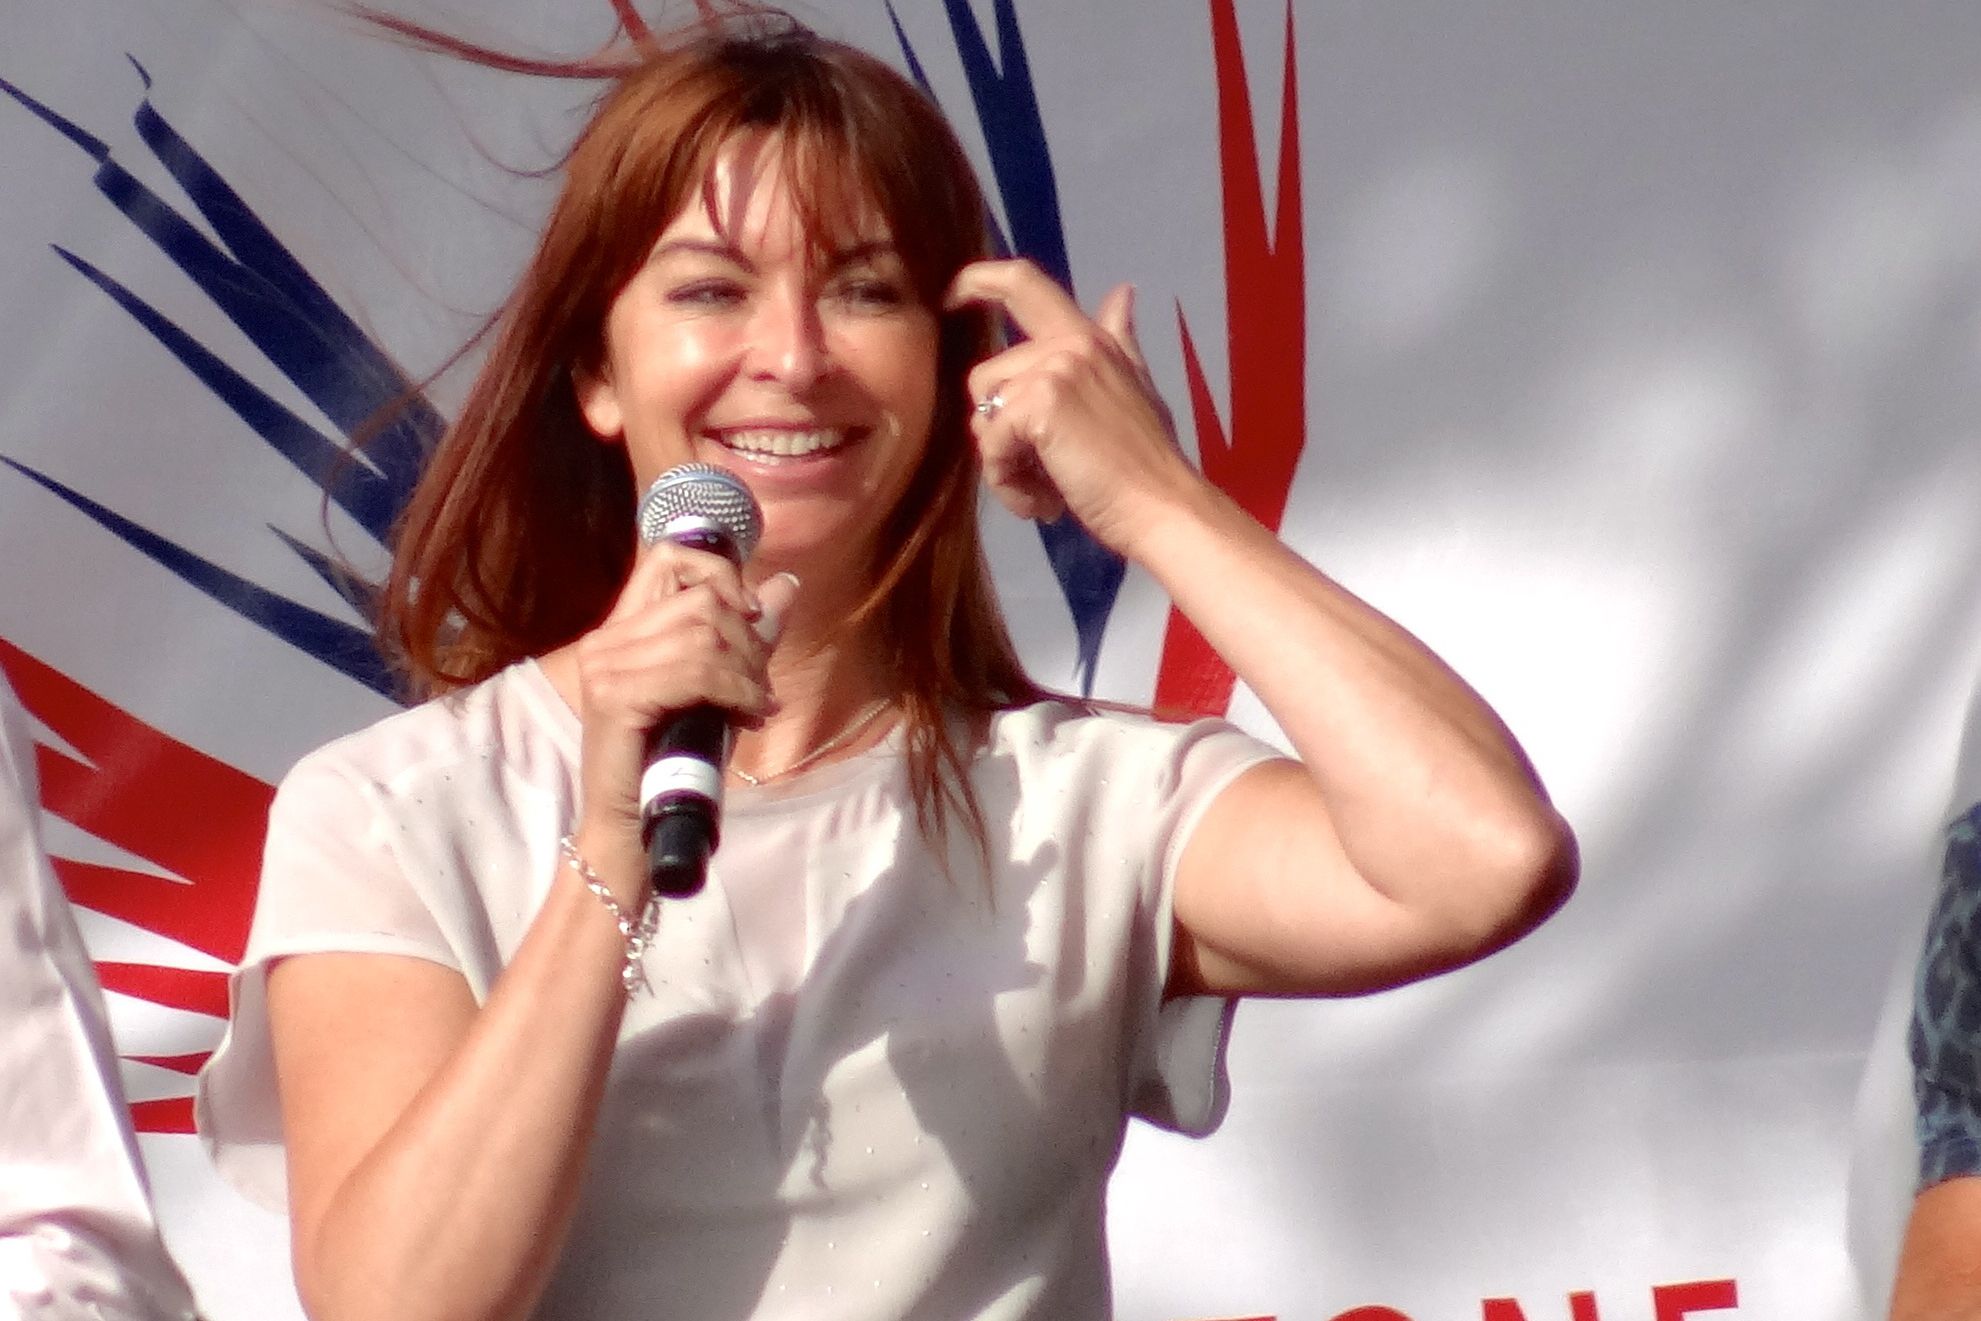 Suzi Perry reportedly signed to be part of BT Sport’s MotoGP presenting team